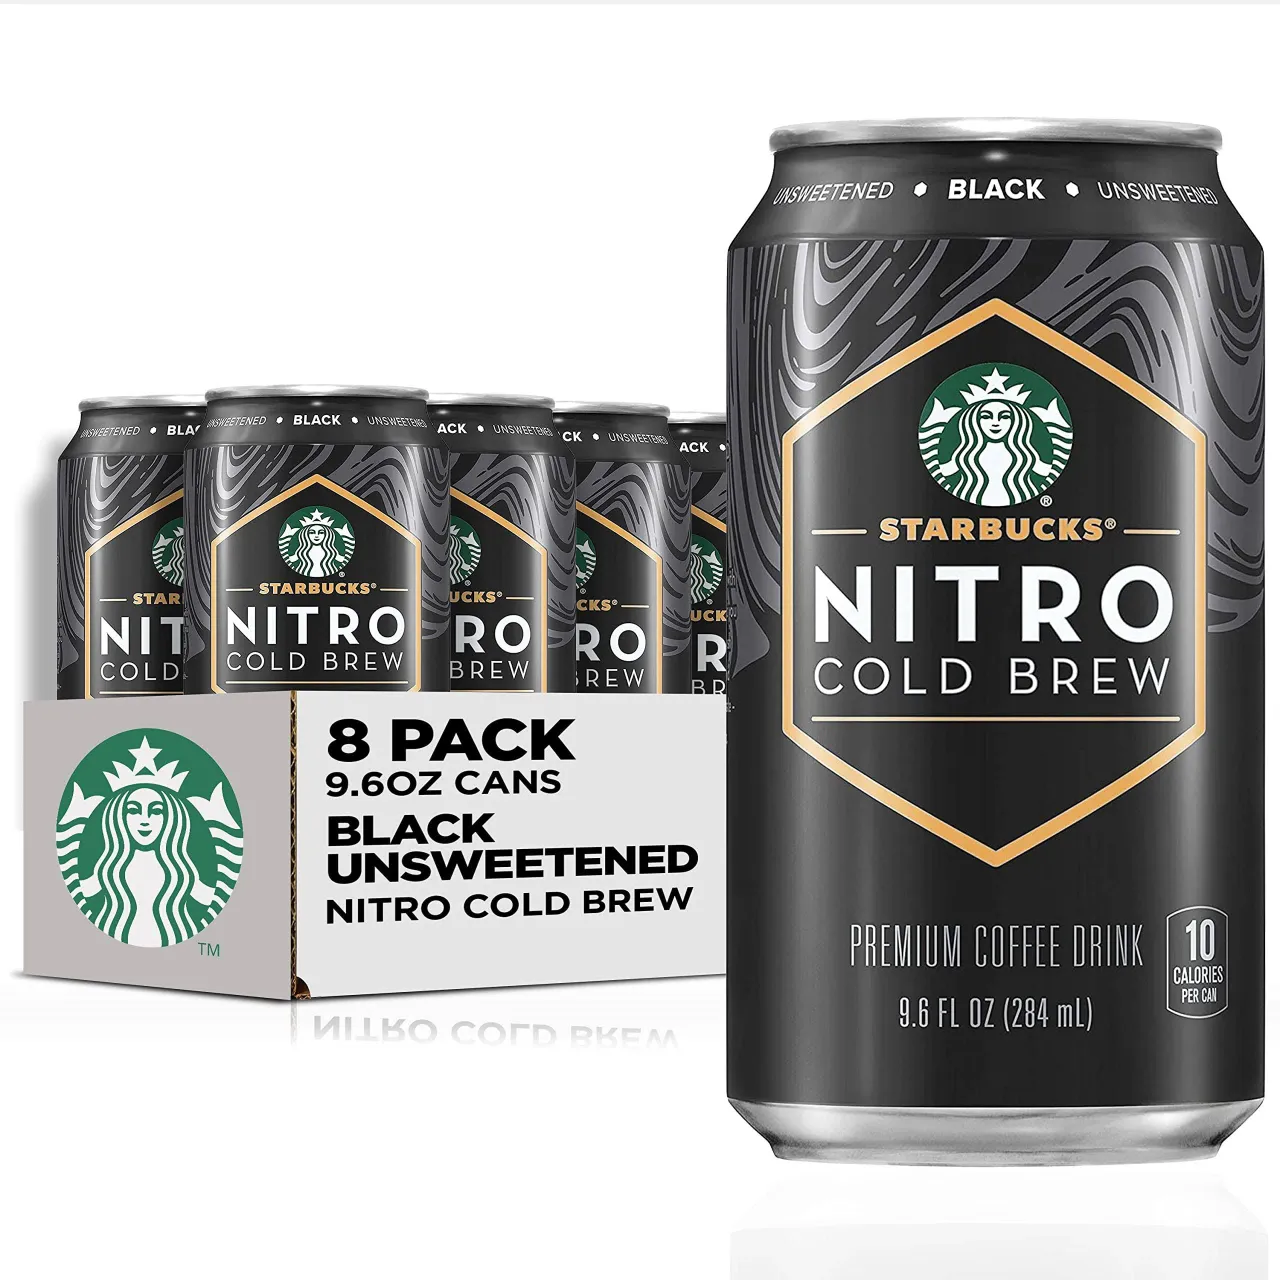 1 Starbucks Nitro Cold Brew, Plain Black, 9.6 fl oz Can (8 Pack) (Packaging Might Be Different)